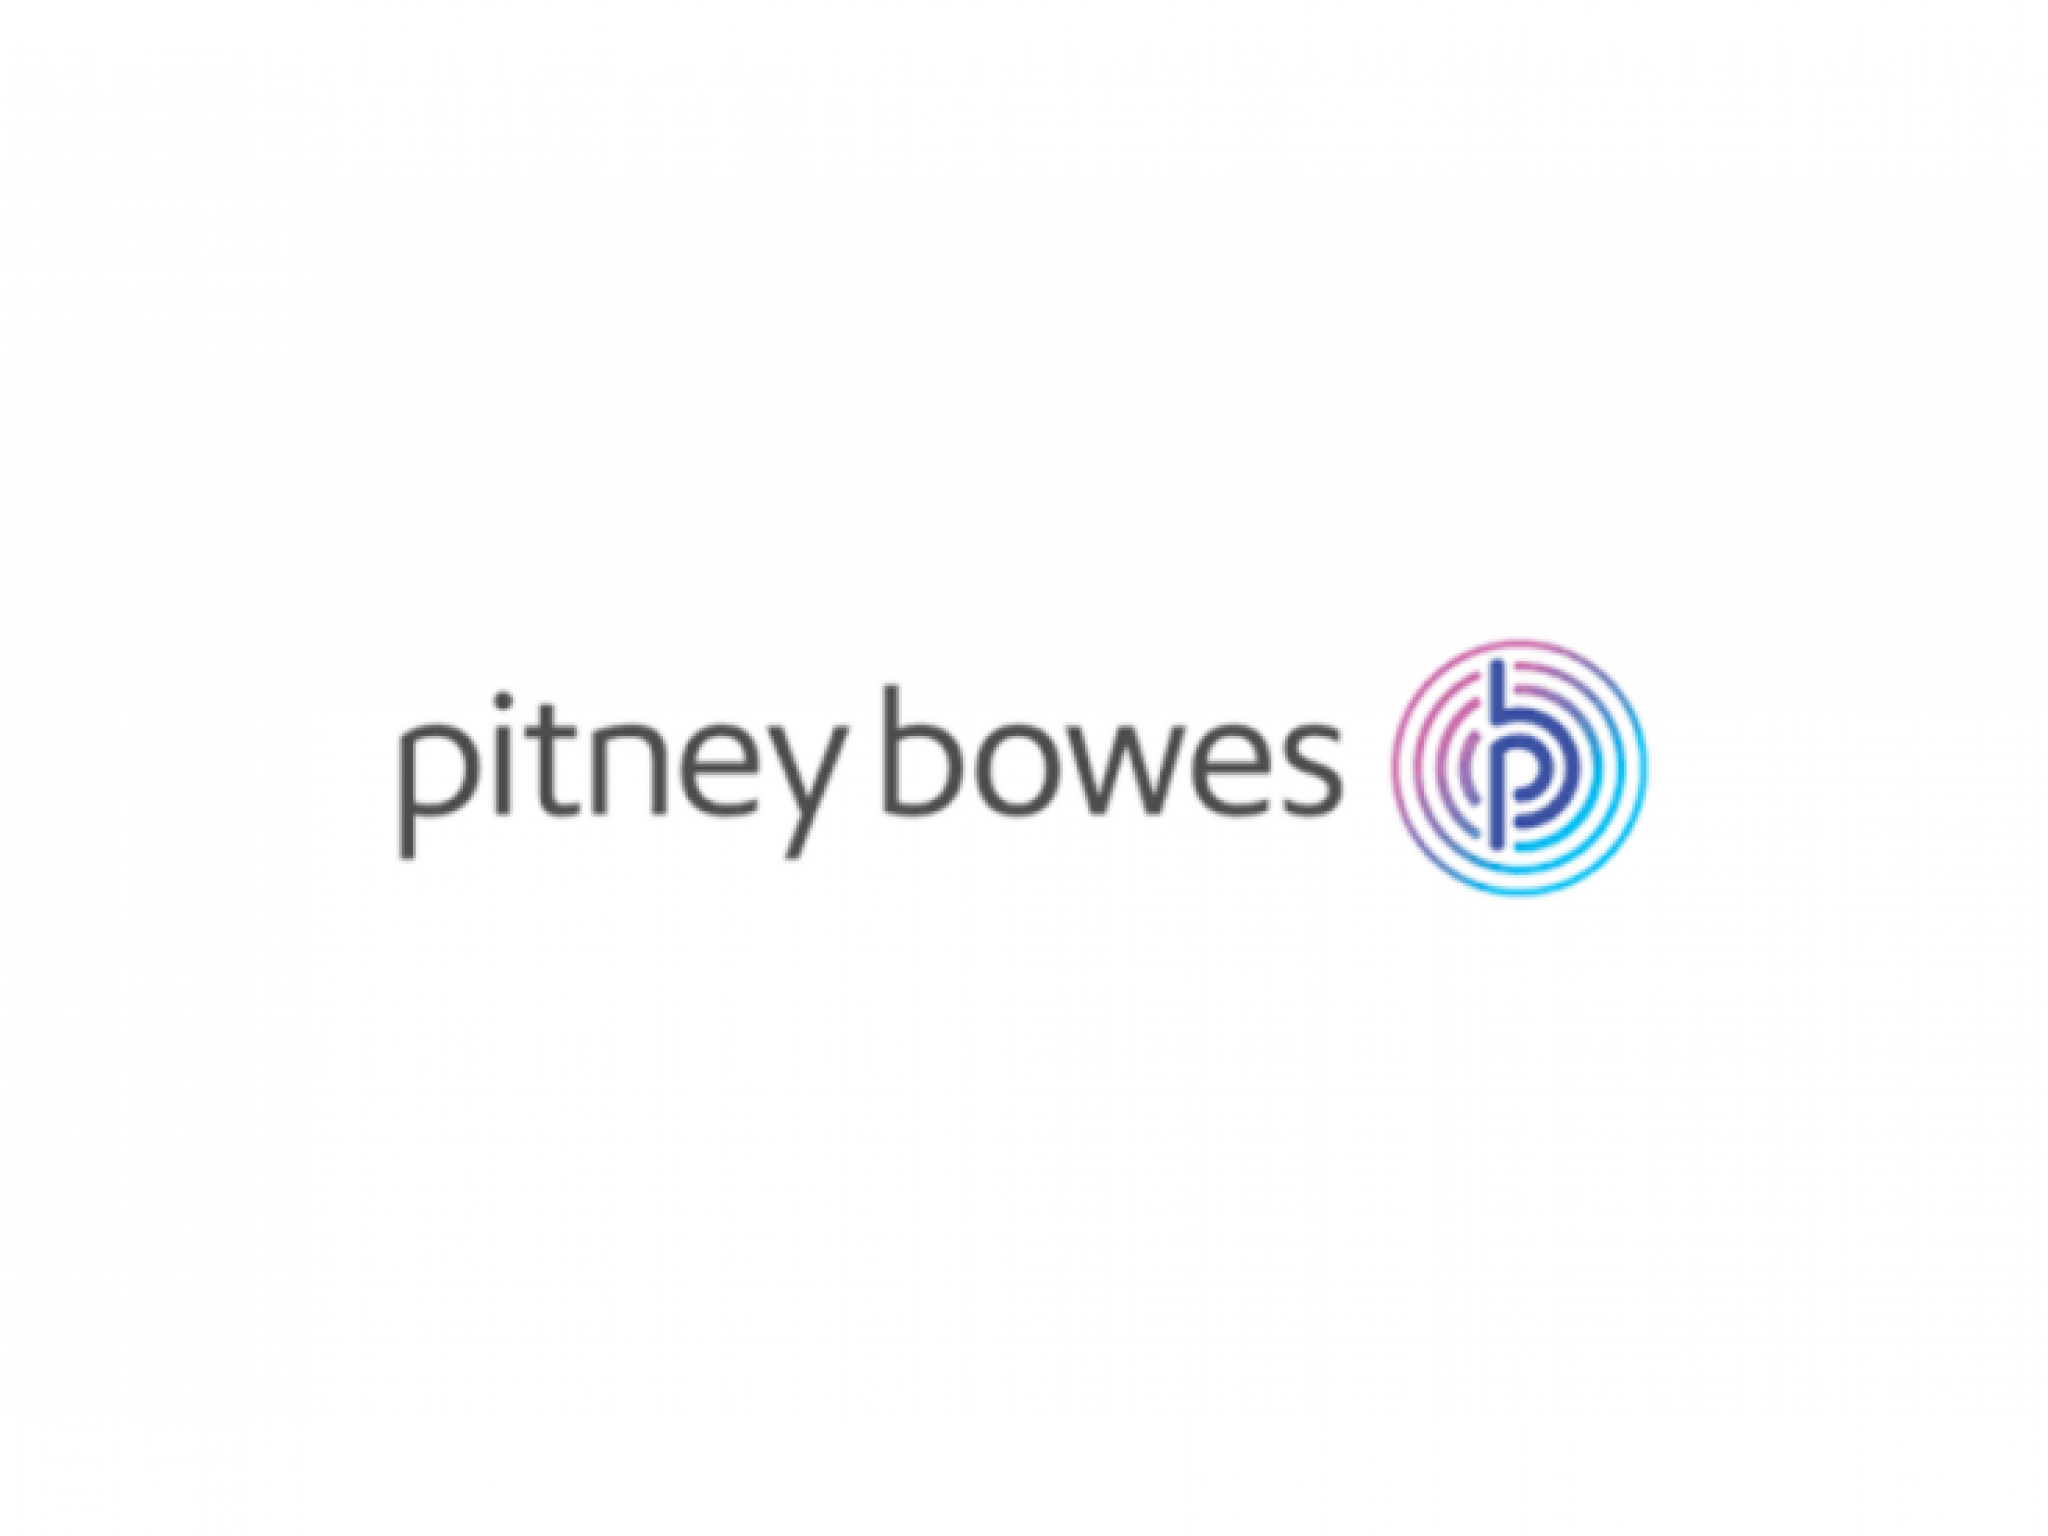  pitney-bowes-posts-stronger-than-expected-q4-earnings-amid-sales-challenges-details 